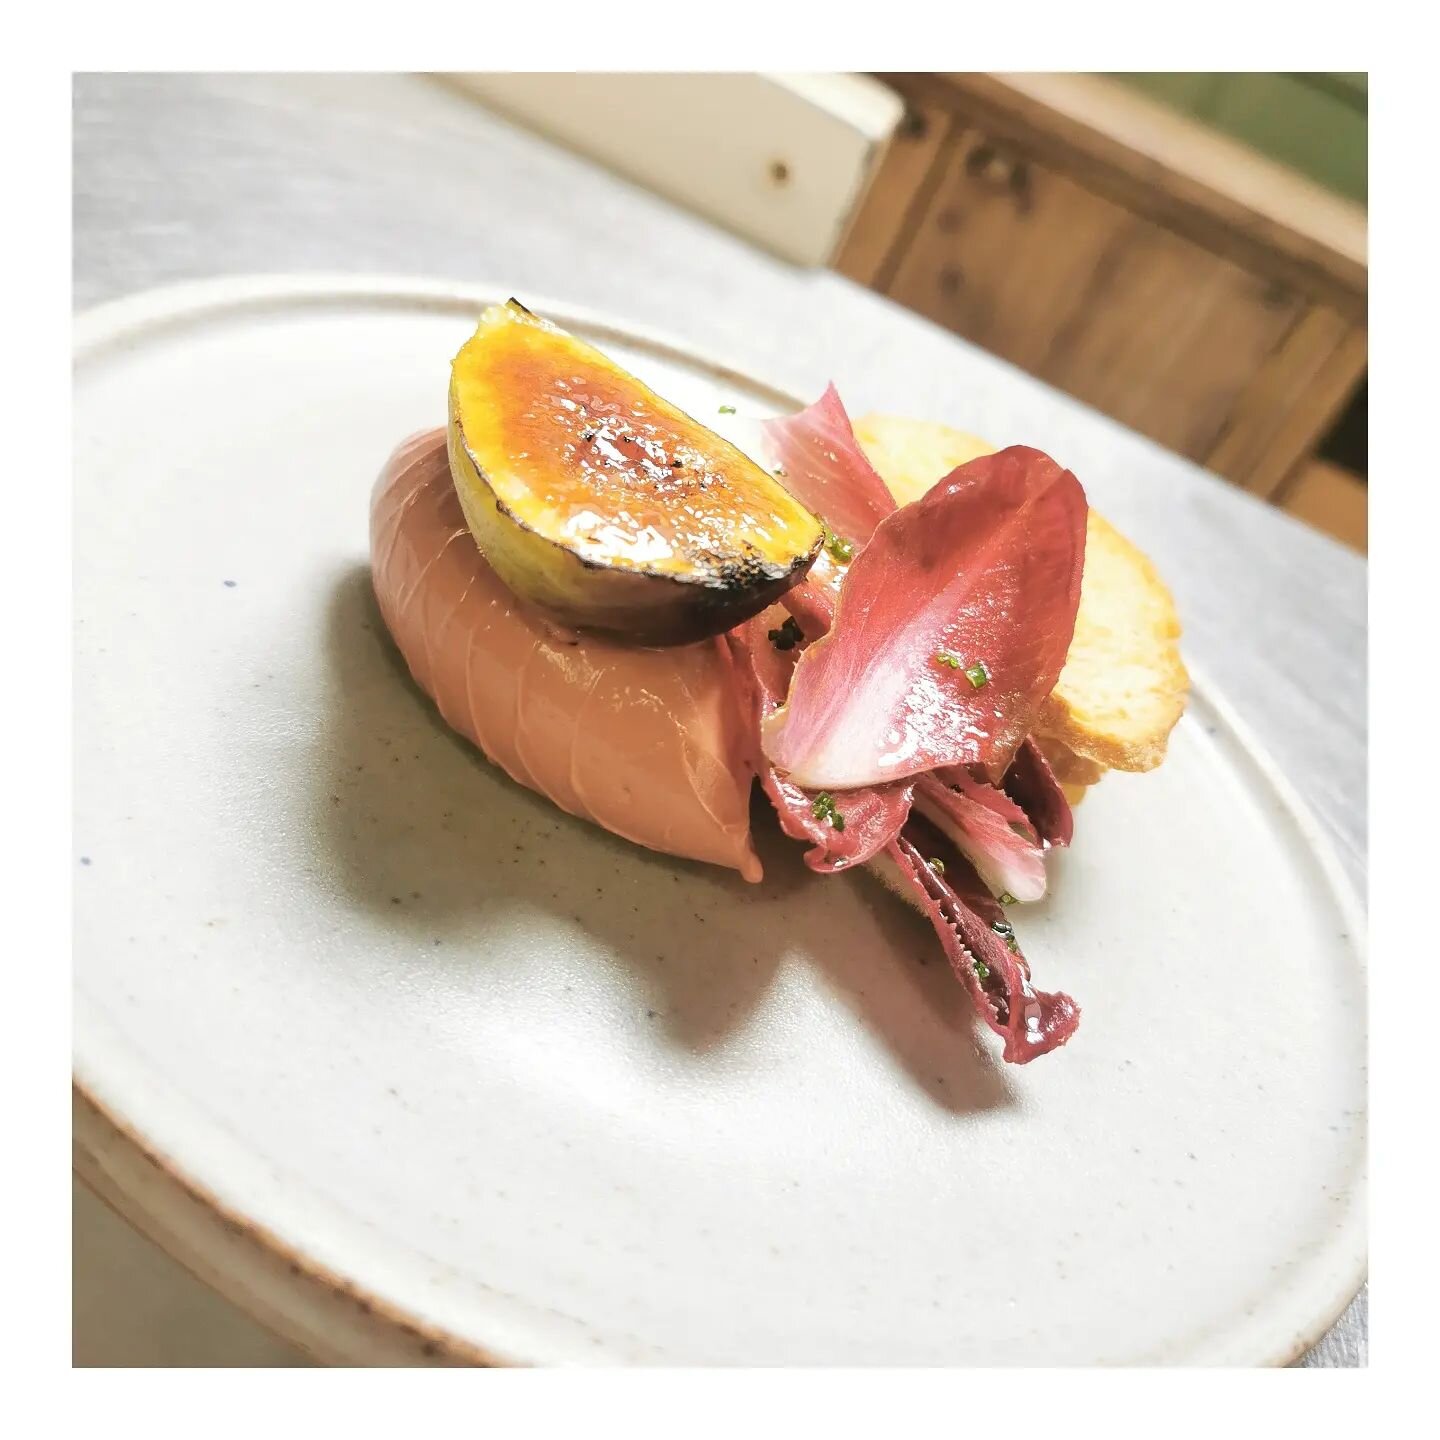 CROWD PLEASERS.. 

They are classics for a reason! Who doesn't love a silky smooth chicken liver parfait?!

Here's ours paired with Roasted Figs, Beers Dressed Chicory, Crisp Breads and Preserve ❤️

#foraycatering #catering #events #private #chef #di